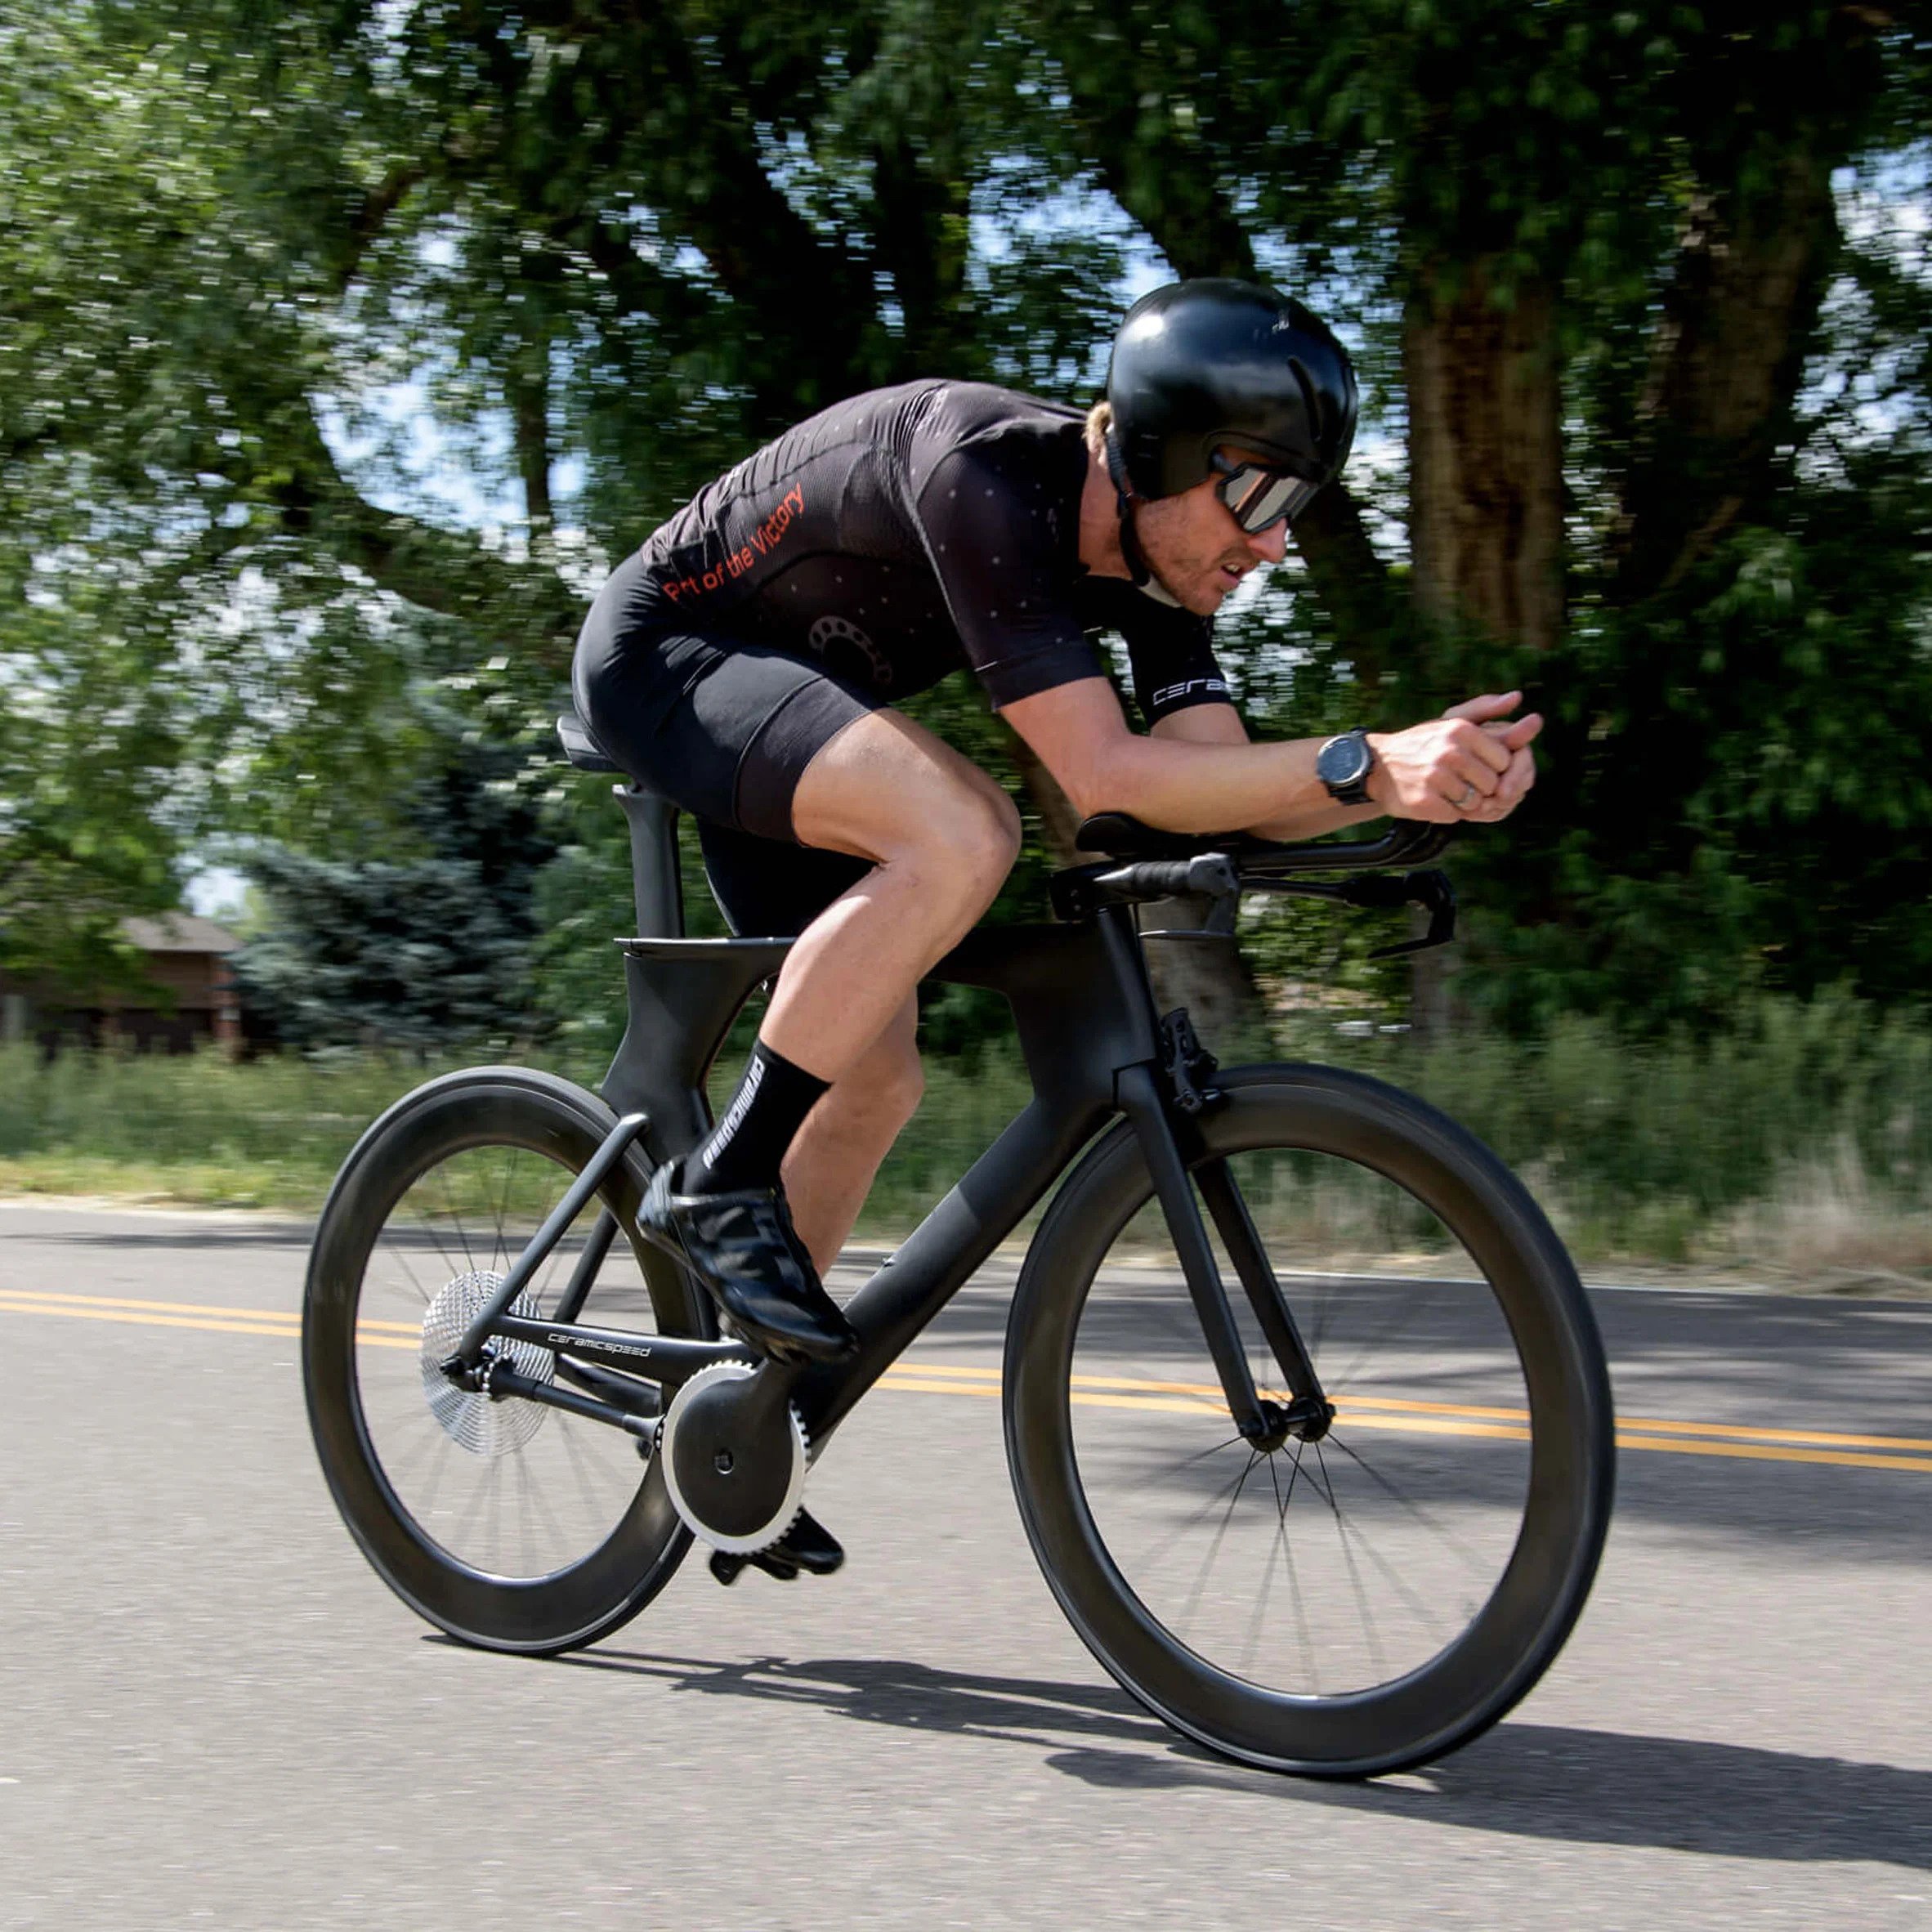 A man wearing black sportswear and riding a chainless bicycle